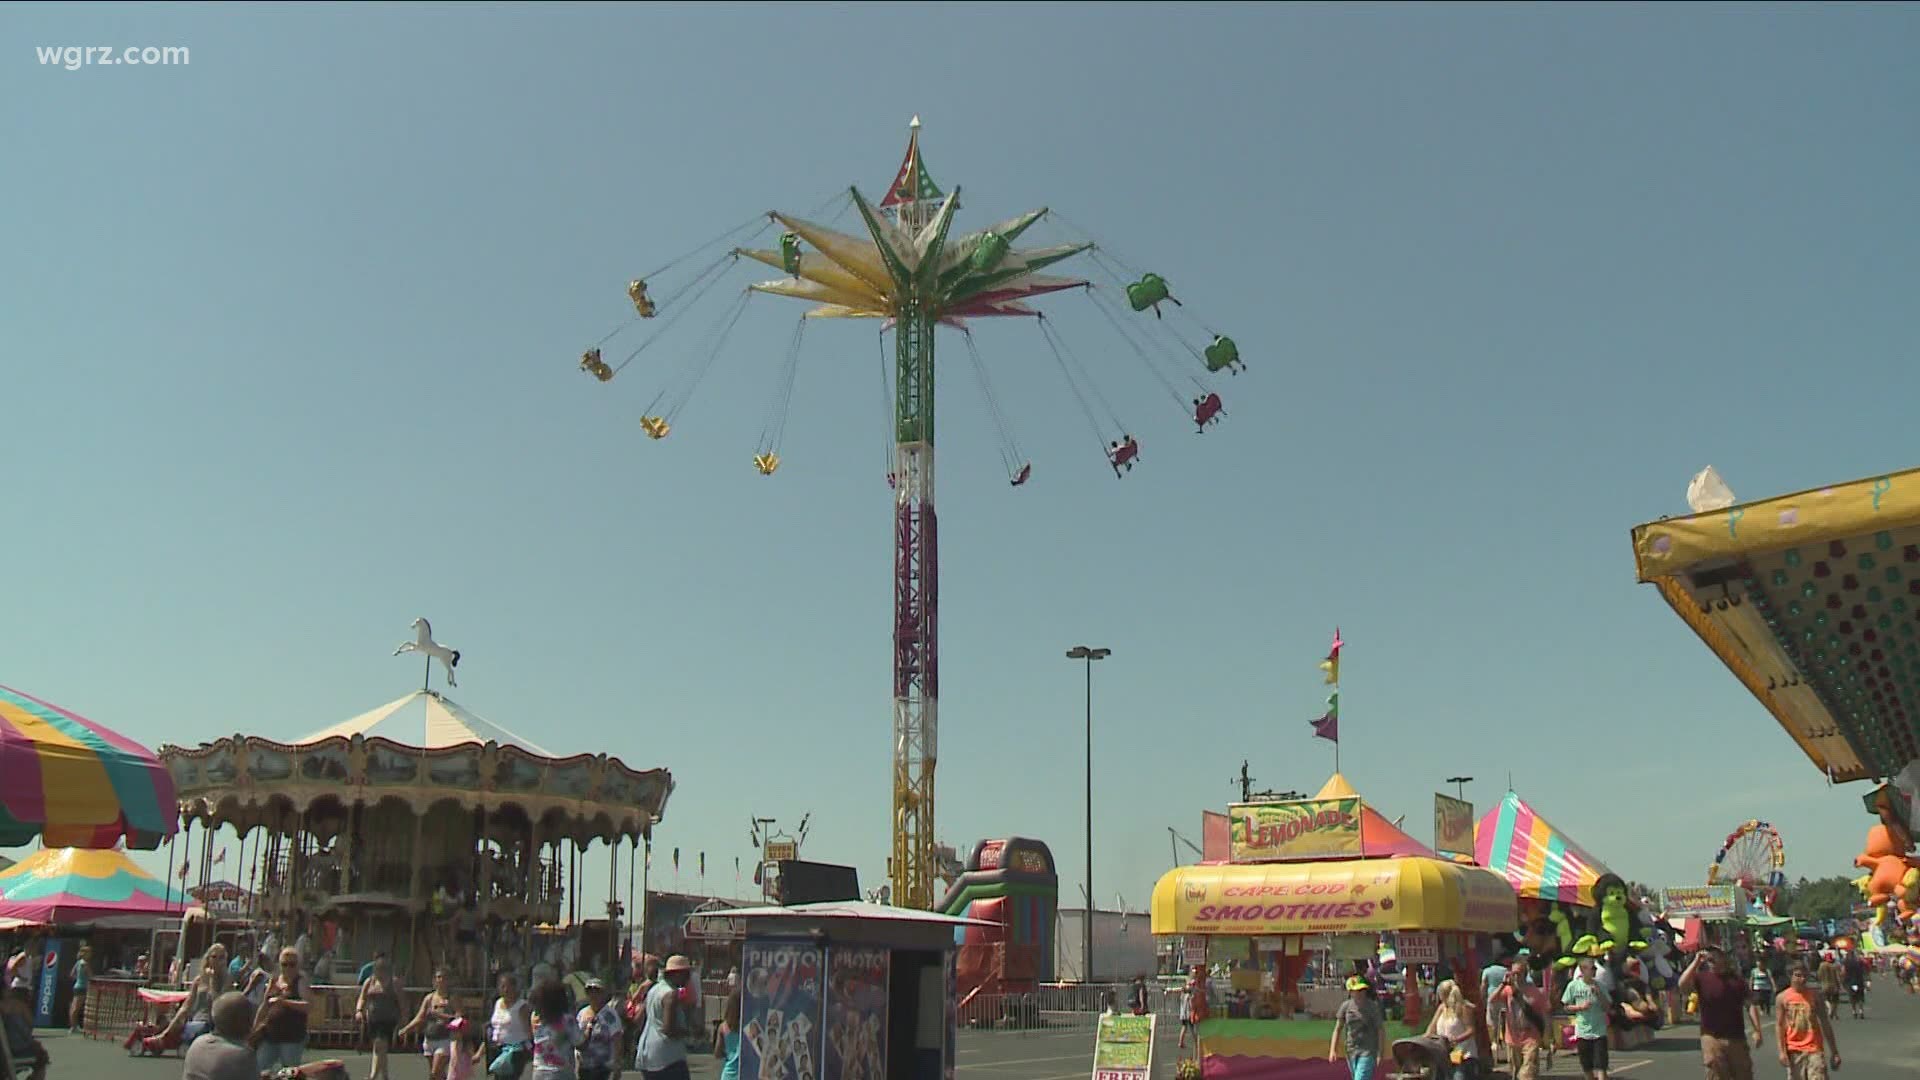 Erie County Fair scheduled for August 11-22